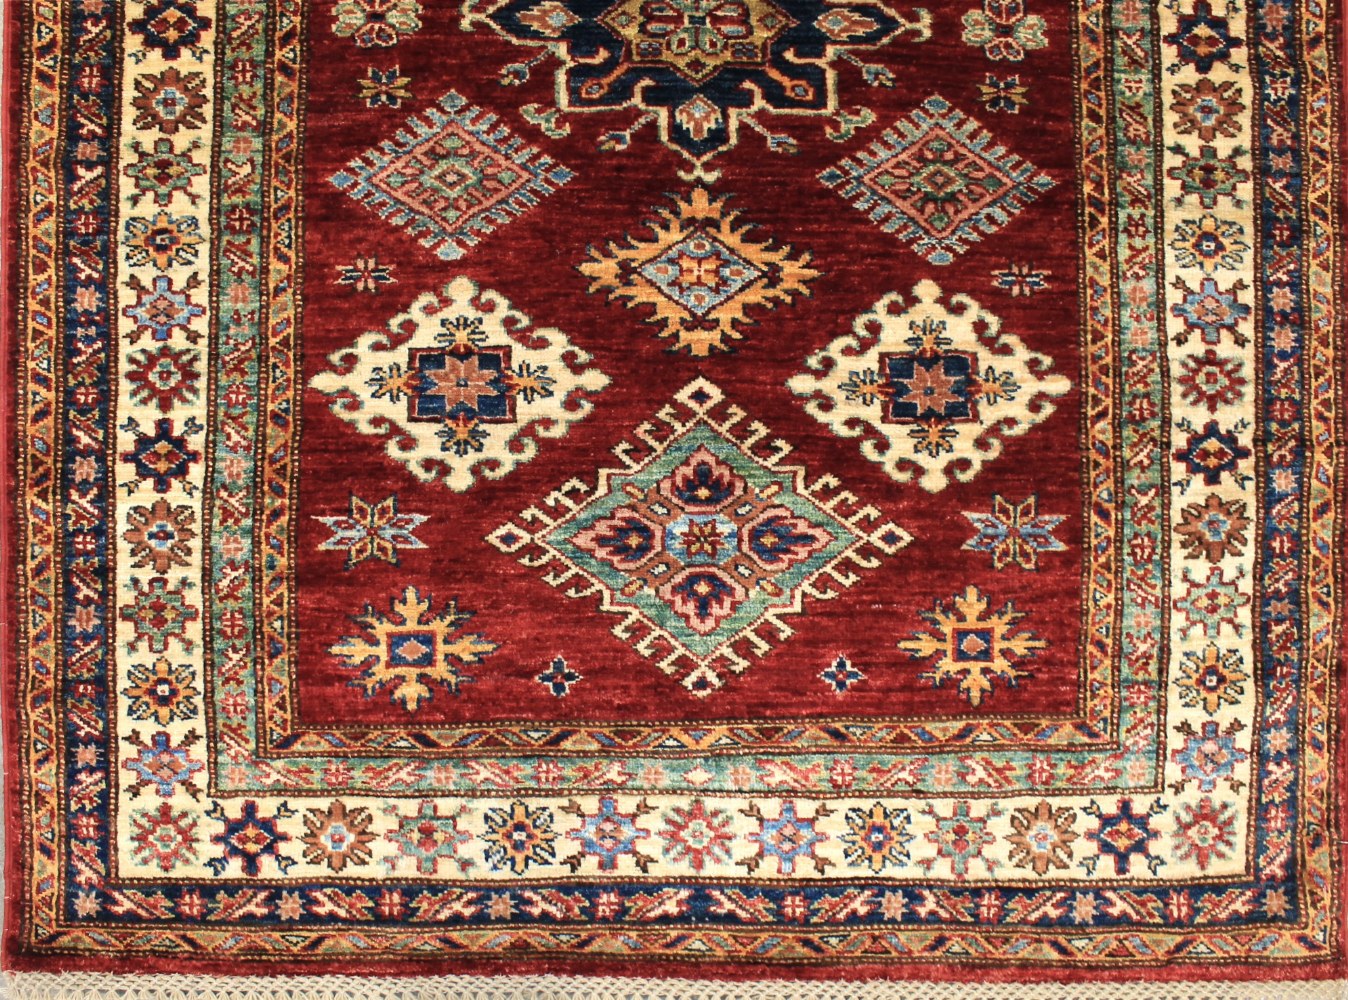 4x6 Kazak Hand Knotted Wool Area Rug - MR026360